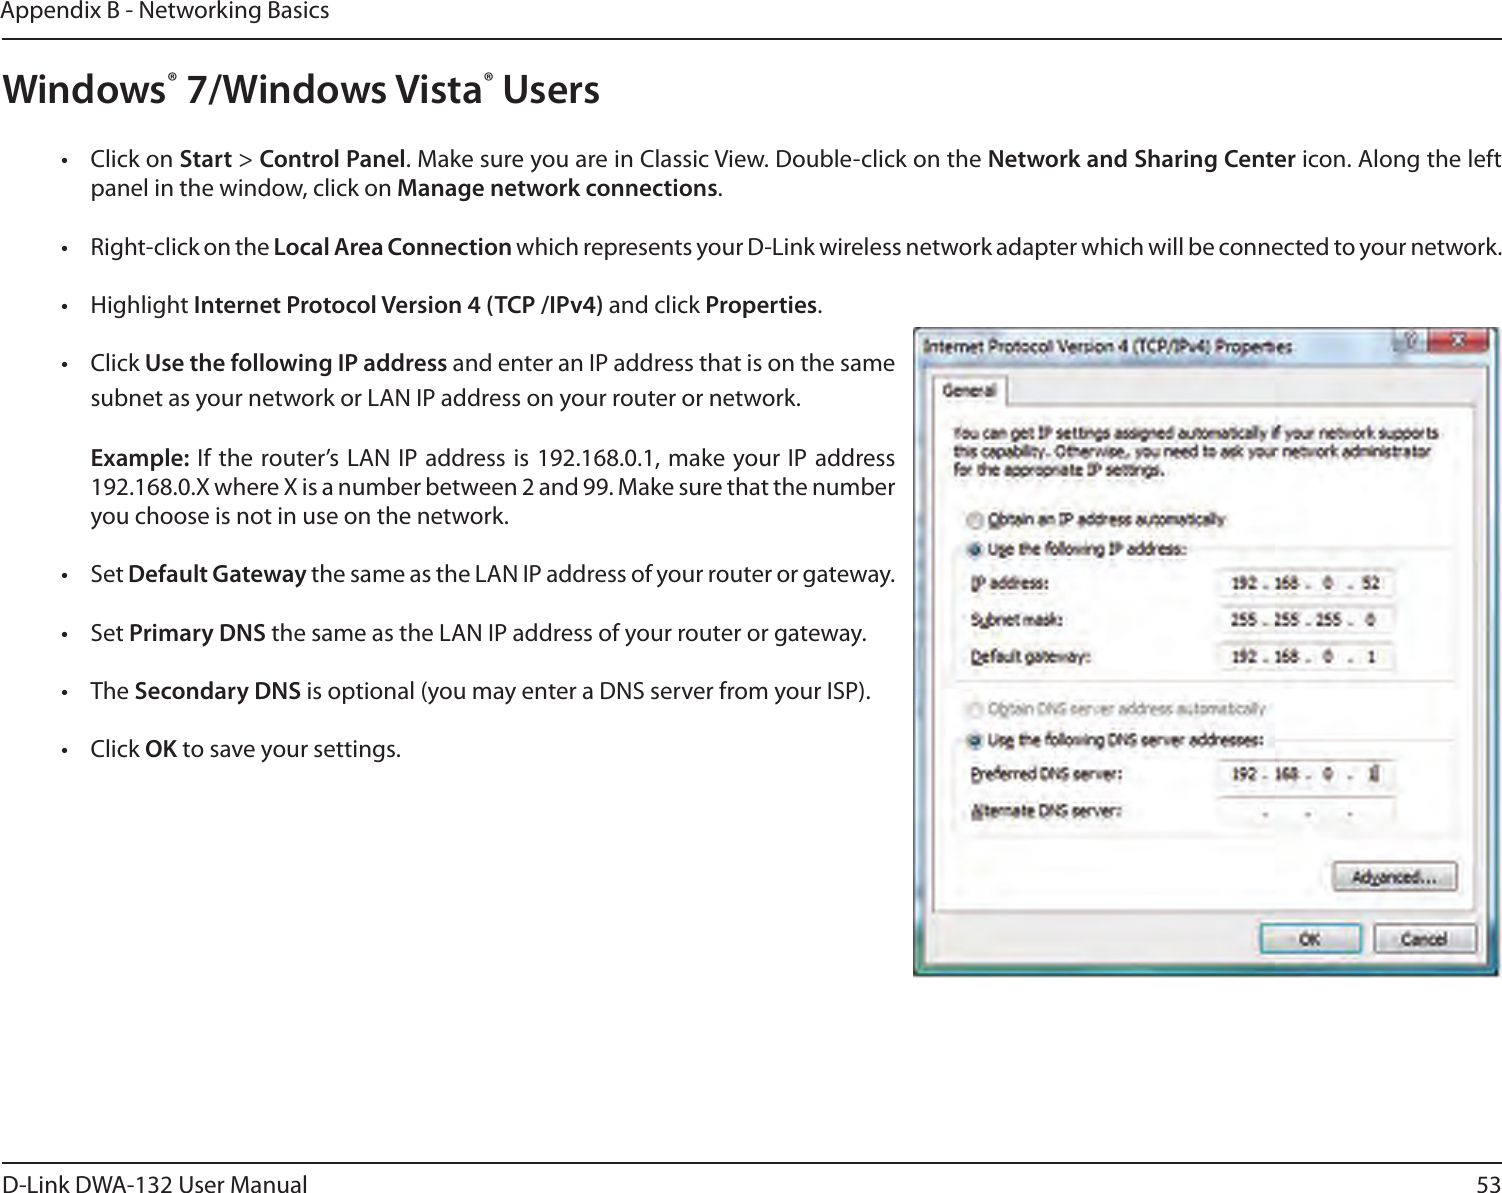 53D-Link DWA-132 User ManualAppendix B - Networking BasicsWindows® 7/Windows Vista® Users•  Click on Start &gt; Control Panel. Make sure you are in Classic View. Double-click on the Network and Sharing Center icon. Along the left panel in the window, click on Manage network connections.•  Right-click on the Local Area Connection which represents your D-Link wireless network adapter which will be connected to your network.•  Highlight Internet Protocol Version 4 (TCP /IPv4) and click Properties.•  Click Use the following IP address and enter an IP address that is on the same subnet as your network or LAN IP address on your router or network. Example: If the router’s LAN IP address is 192.168.0.1, make your IP address 192.168.0.X where X is a number between 2 and 99. Make sure that the number you choose is not in use on the network. •  Set Default Gateway the same as the LAN IP address of your router or gateway.•  Set Primary DNS the same as the LAN IP address of your router or gateway. •  The Secondary DNS is optional (you may enter a DNS server from your ISP).•  Click OK to save your settings.